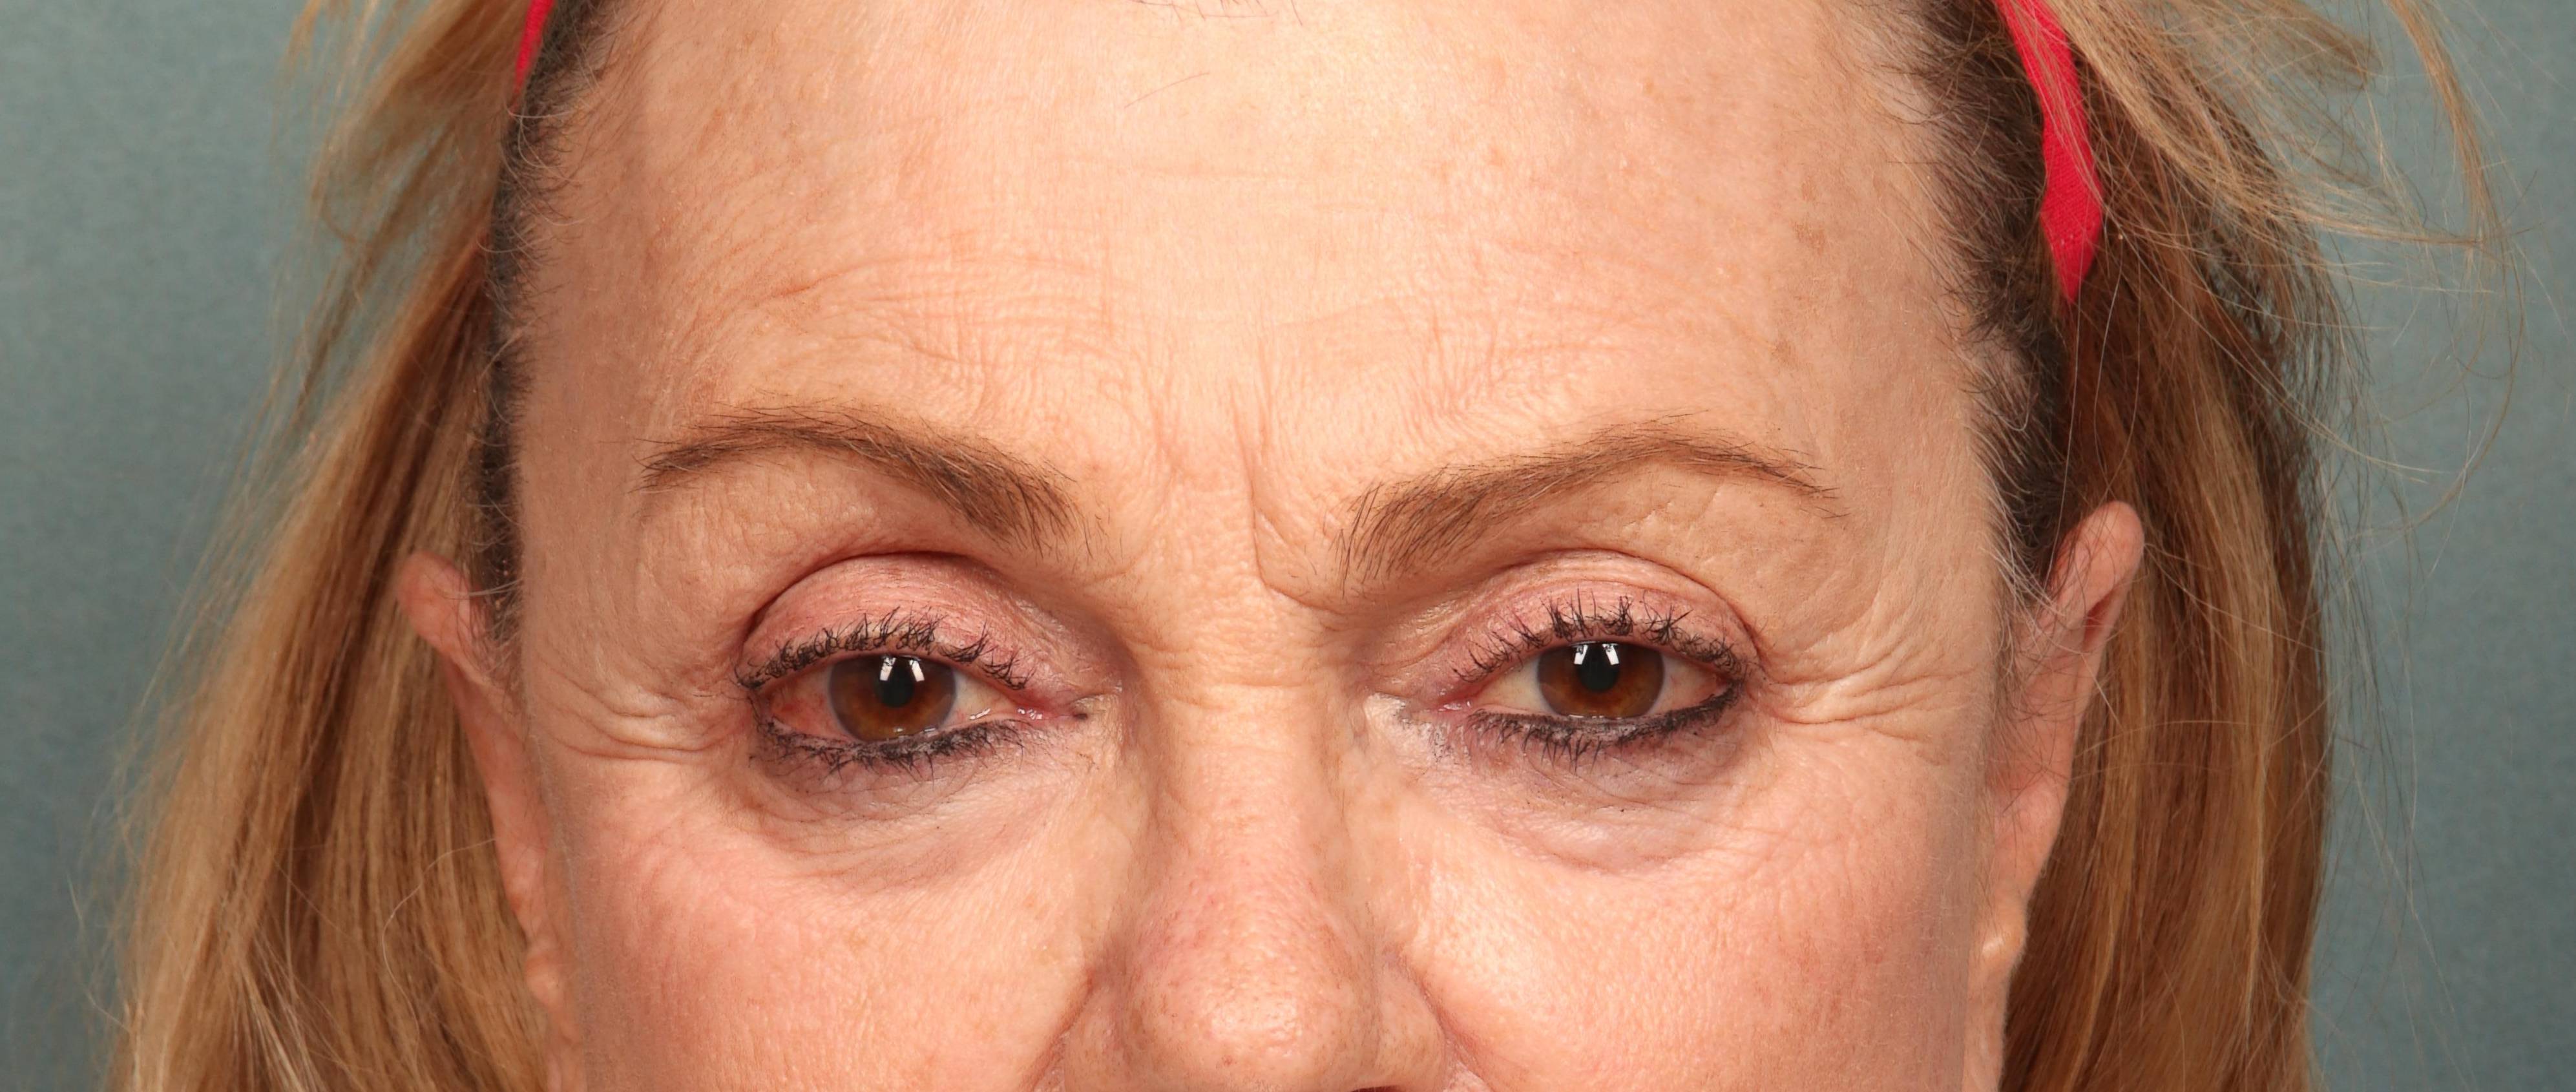 Brow Lift Case 7 Before